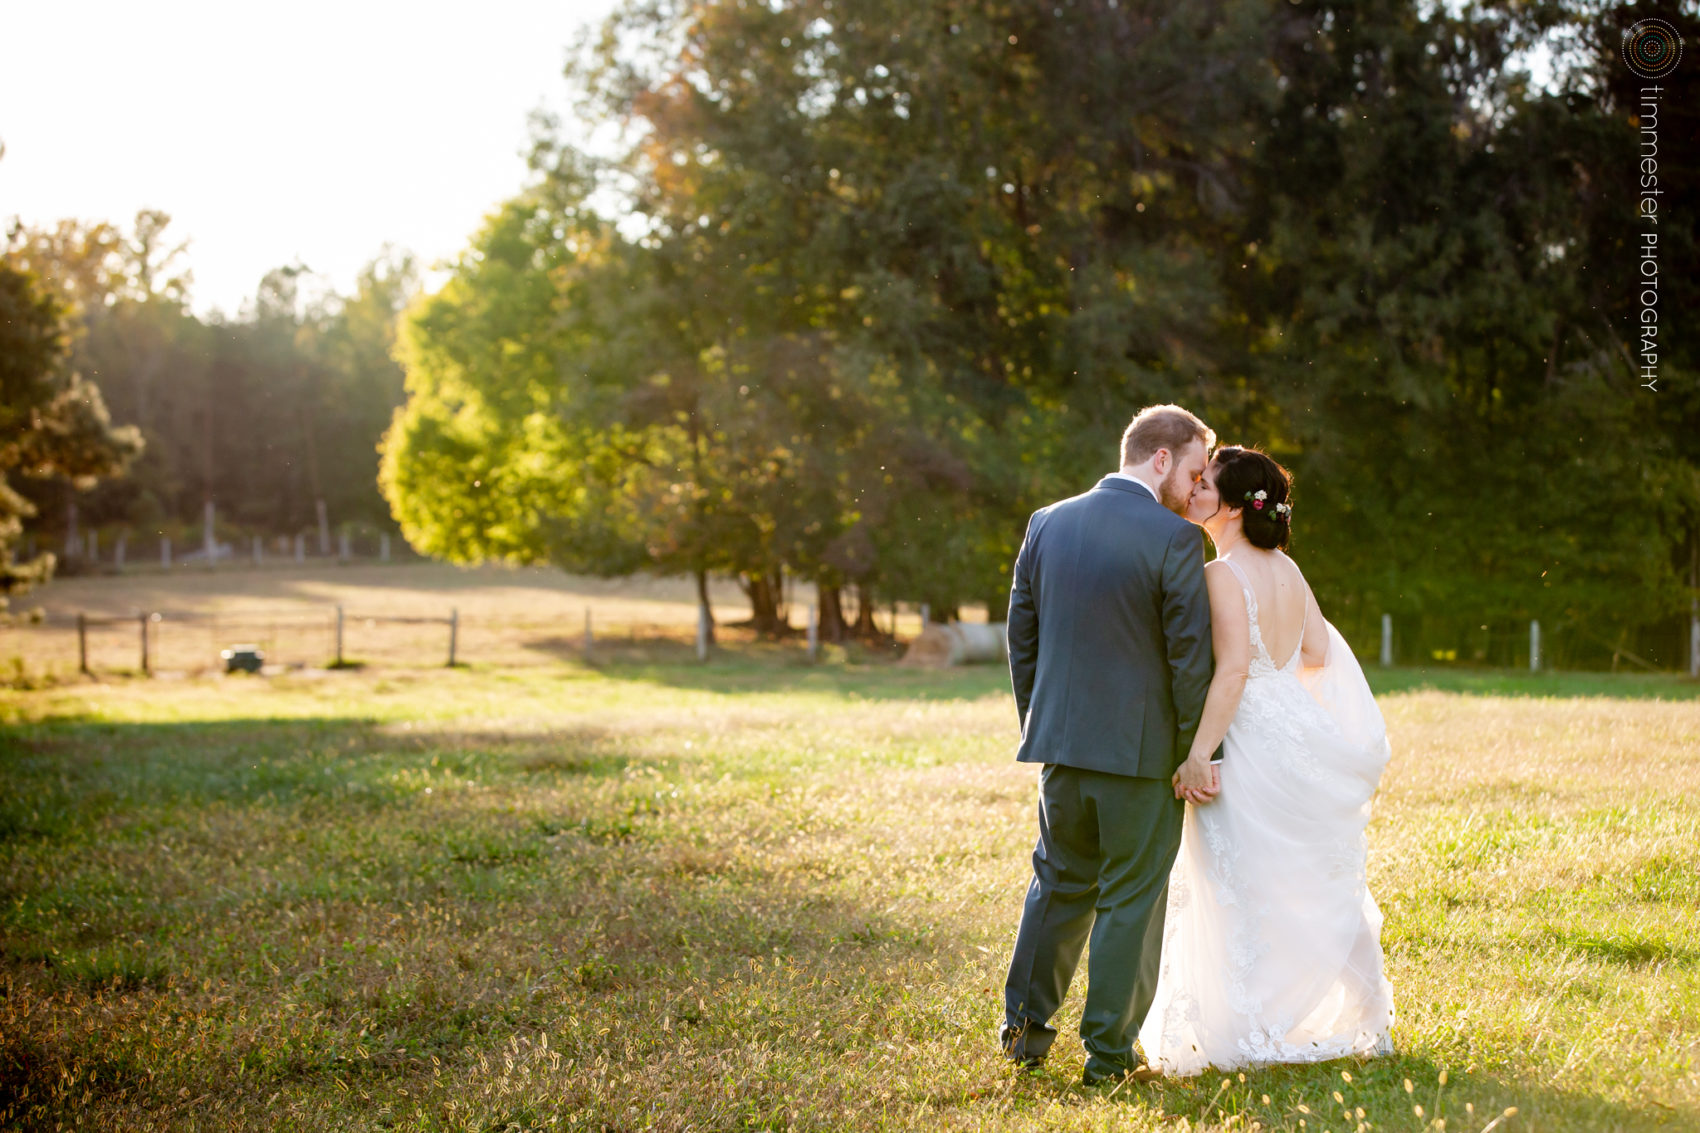 A beautiful outdoor October wedding at the rustic barn of Sassafras Fork Farm in Rougement, North Carolina.